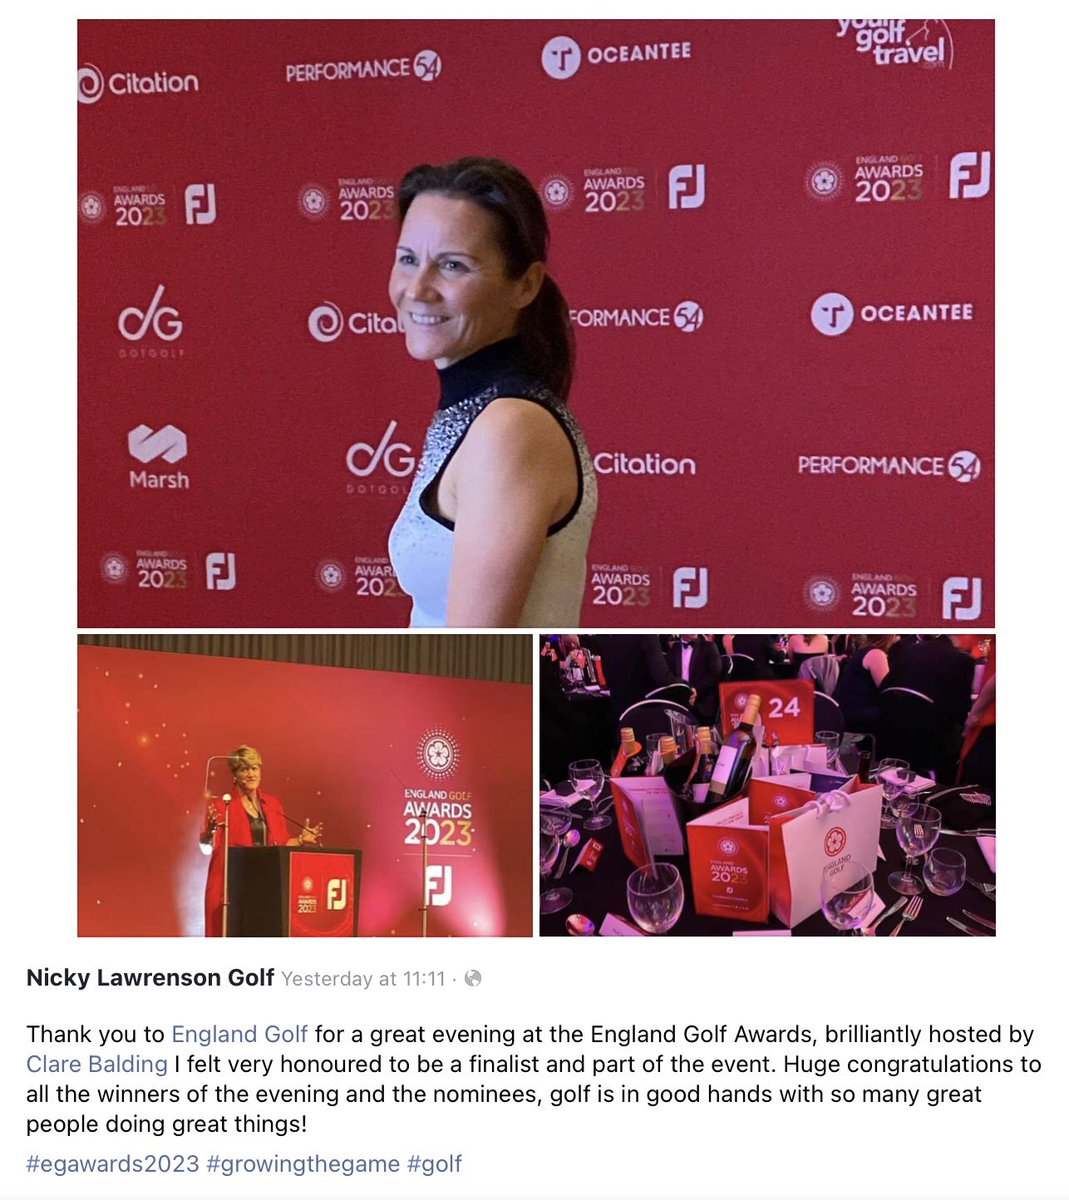 Our founder Nicky Lawrenson, was honoured to be nominated as a finalist in the Women & Girls Trailblazer category at the #EGAwards2023 this week. Huge congratulations to the winners of the category, The Girl Guiding Project, & all the fantastic winners of the evening. #Golf